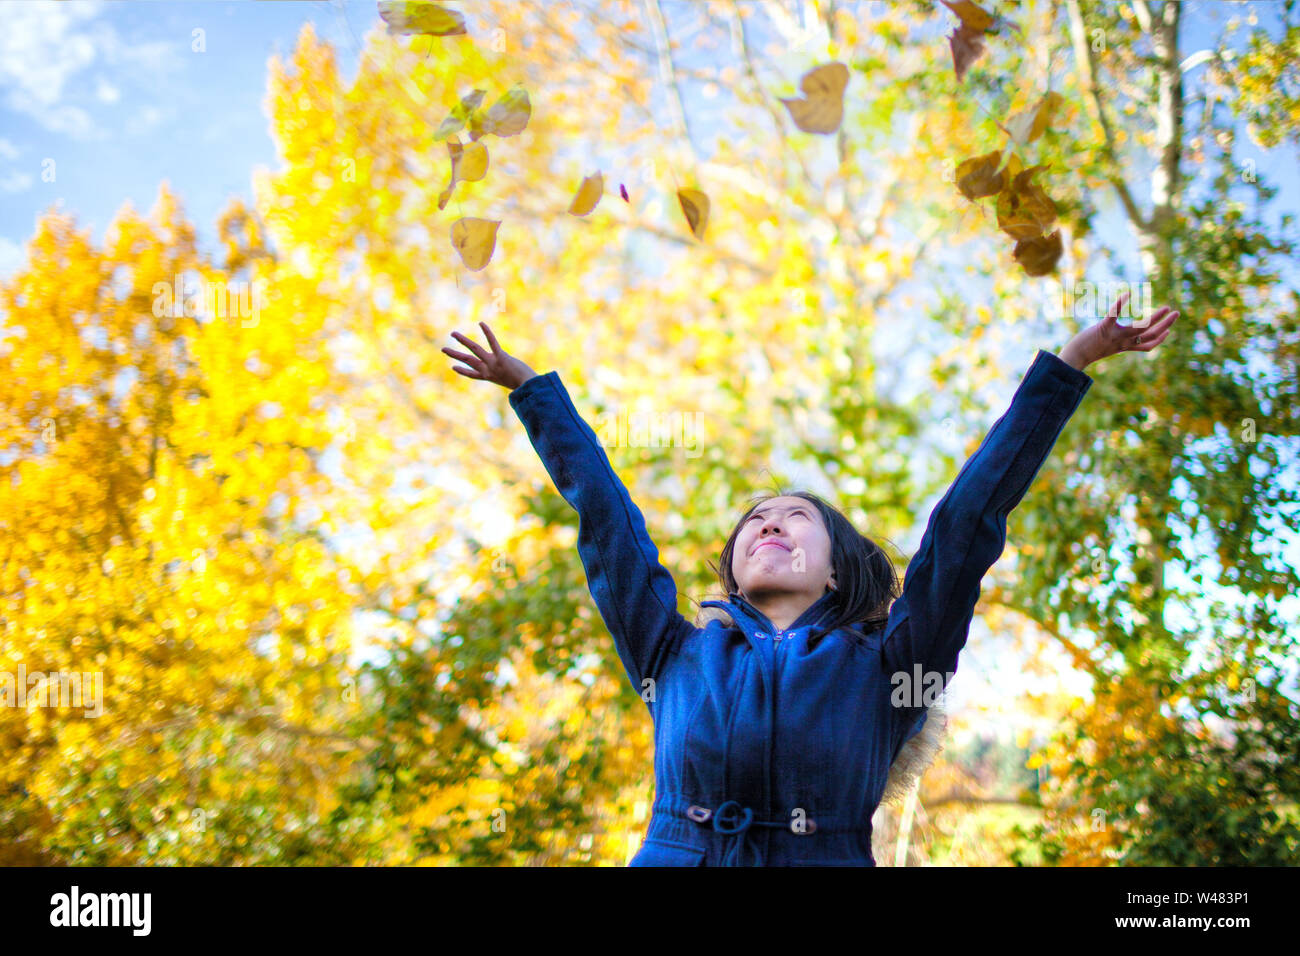 Asian teenage girl tossing up yellow leaves in the park with trees changing colors during Fall season. Stock Photo